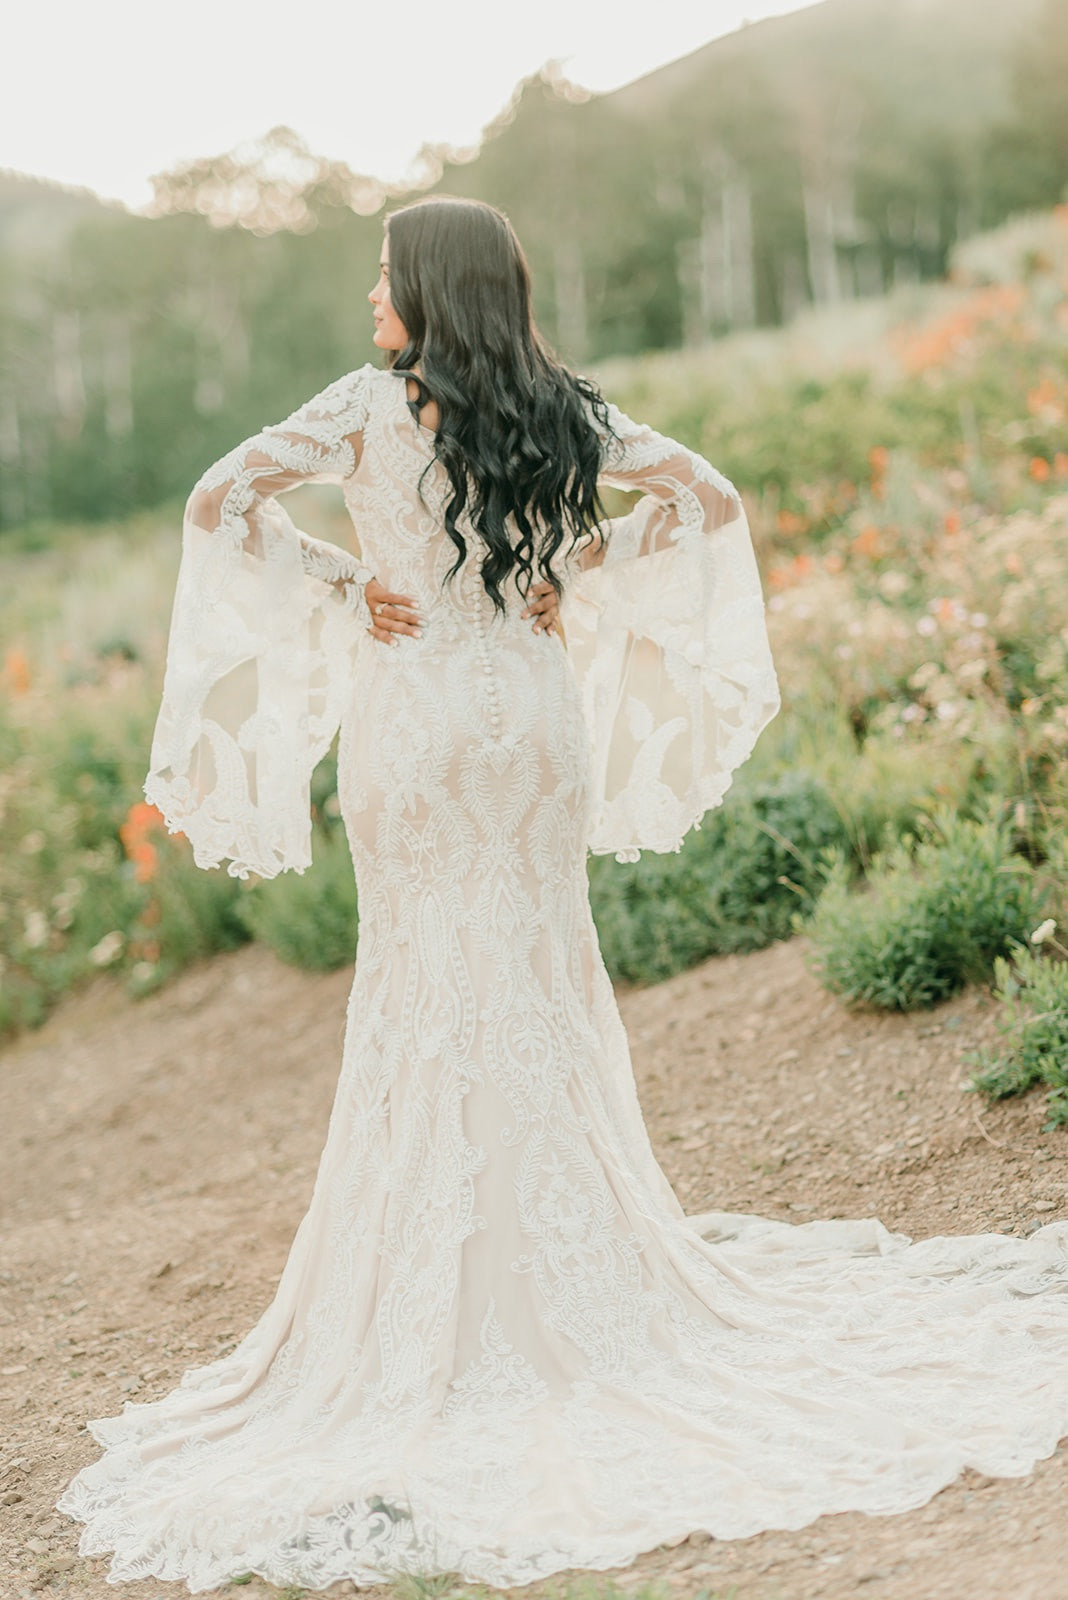 bell sleeve wedding gown